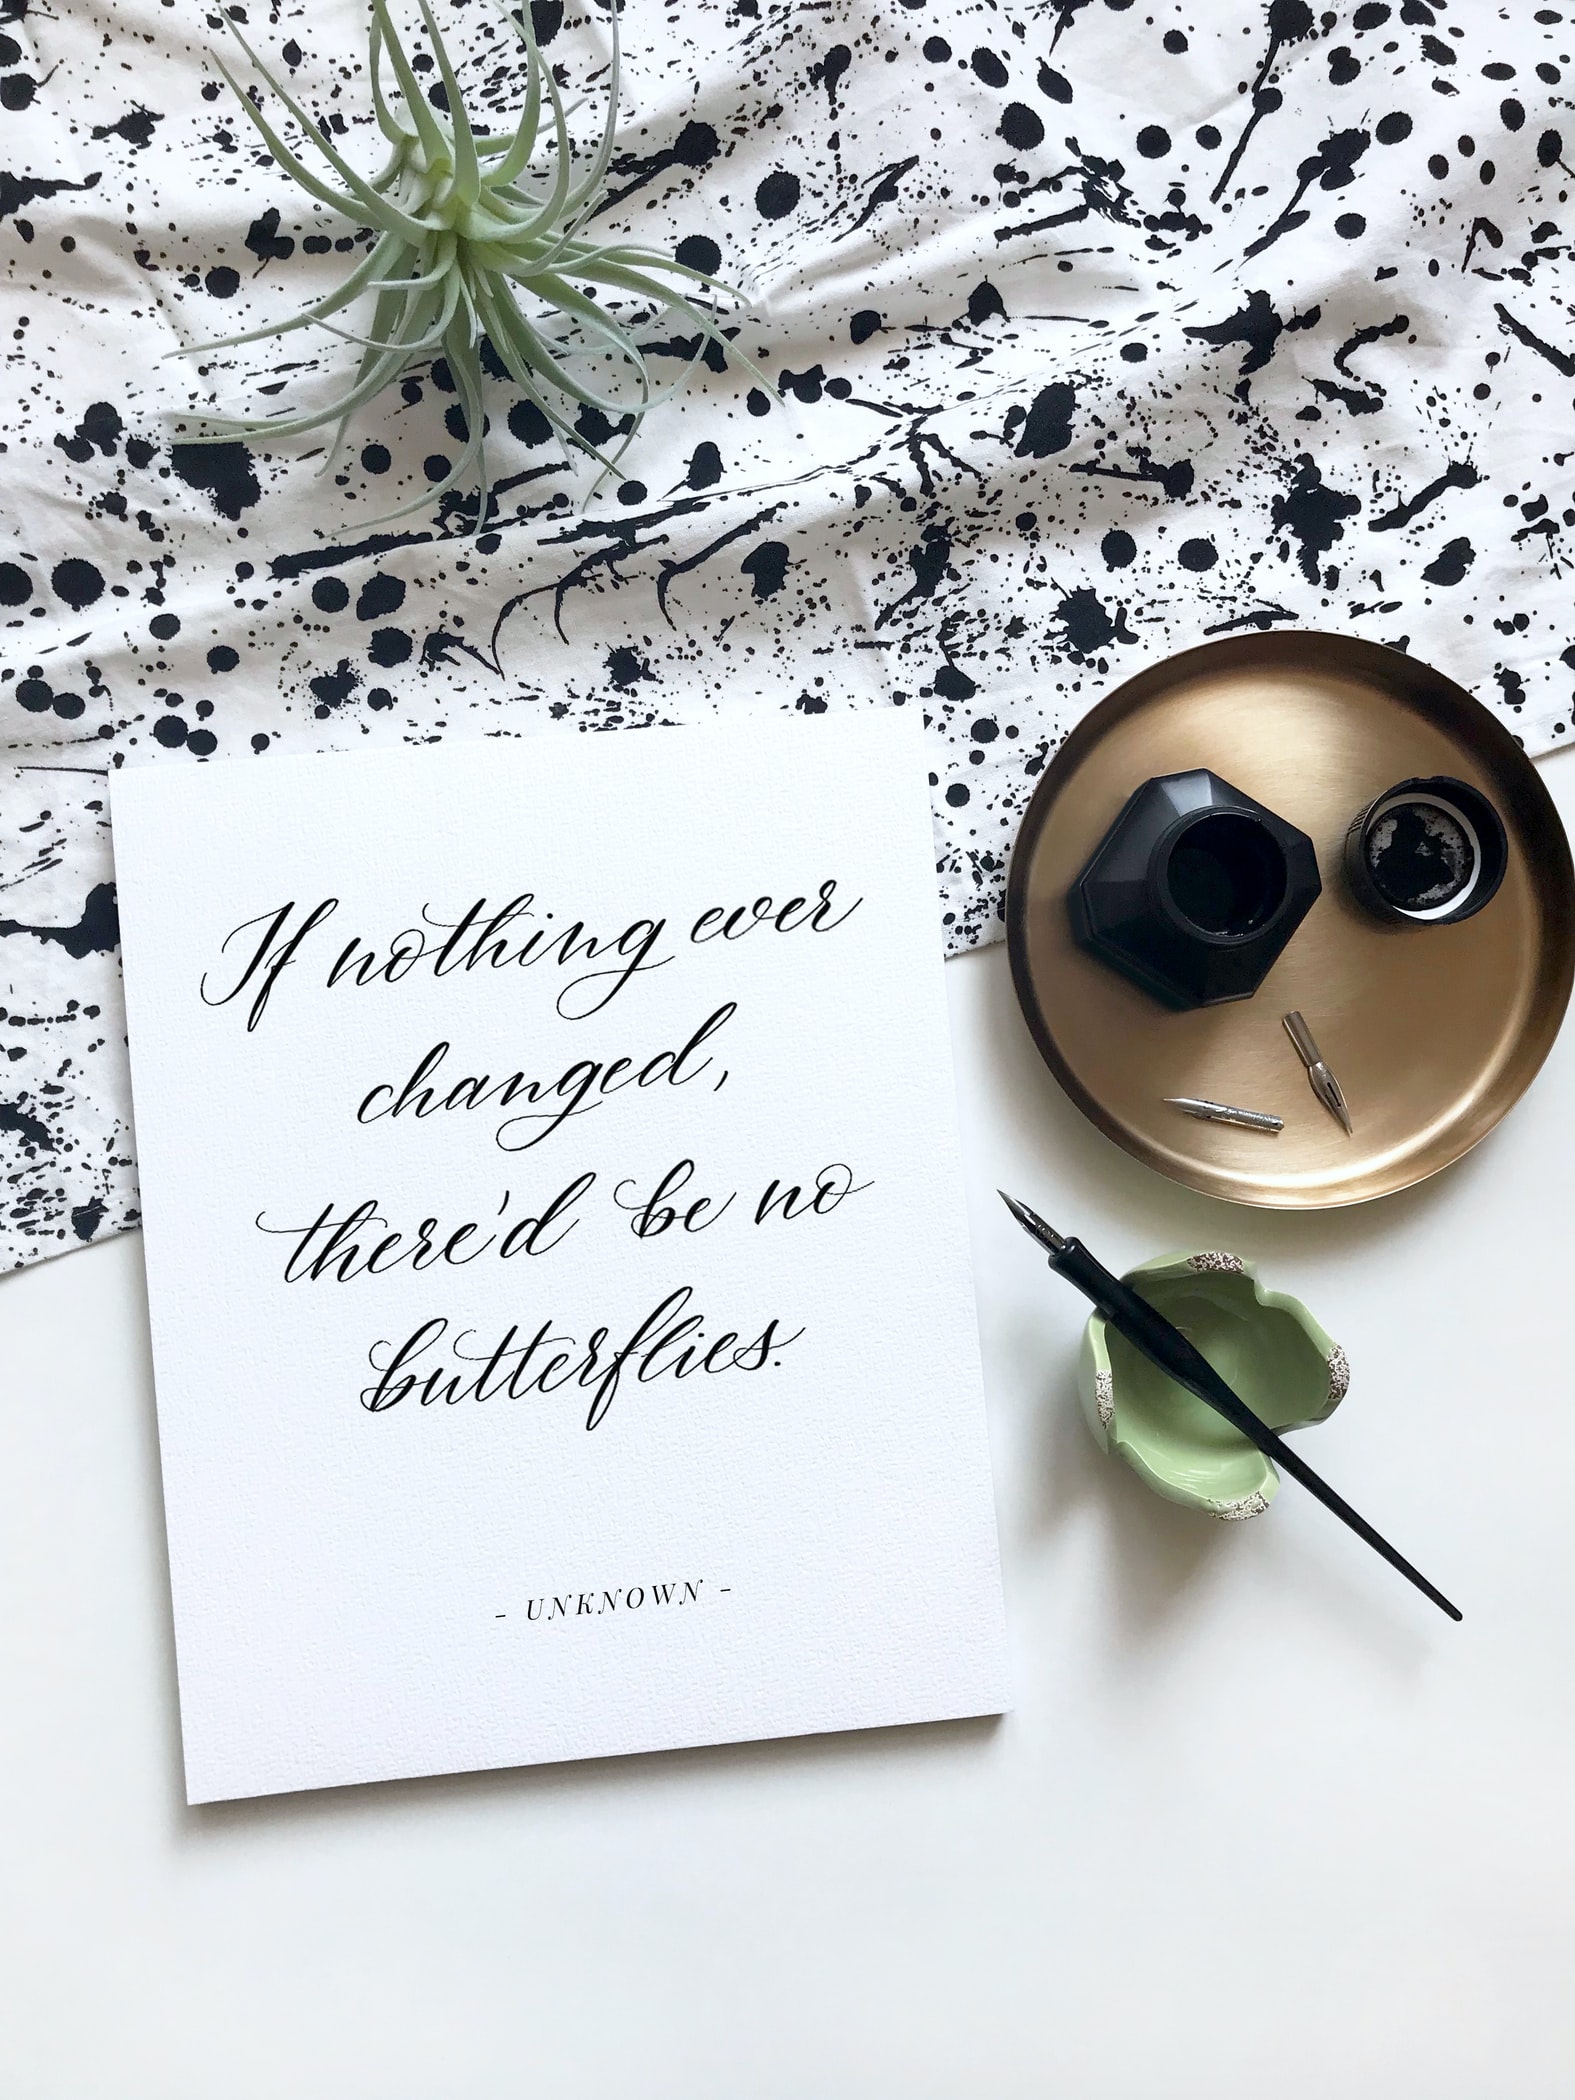 how to learn calligraphy by yourself